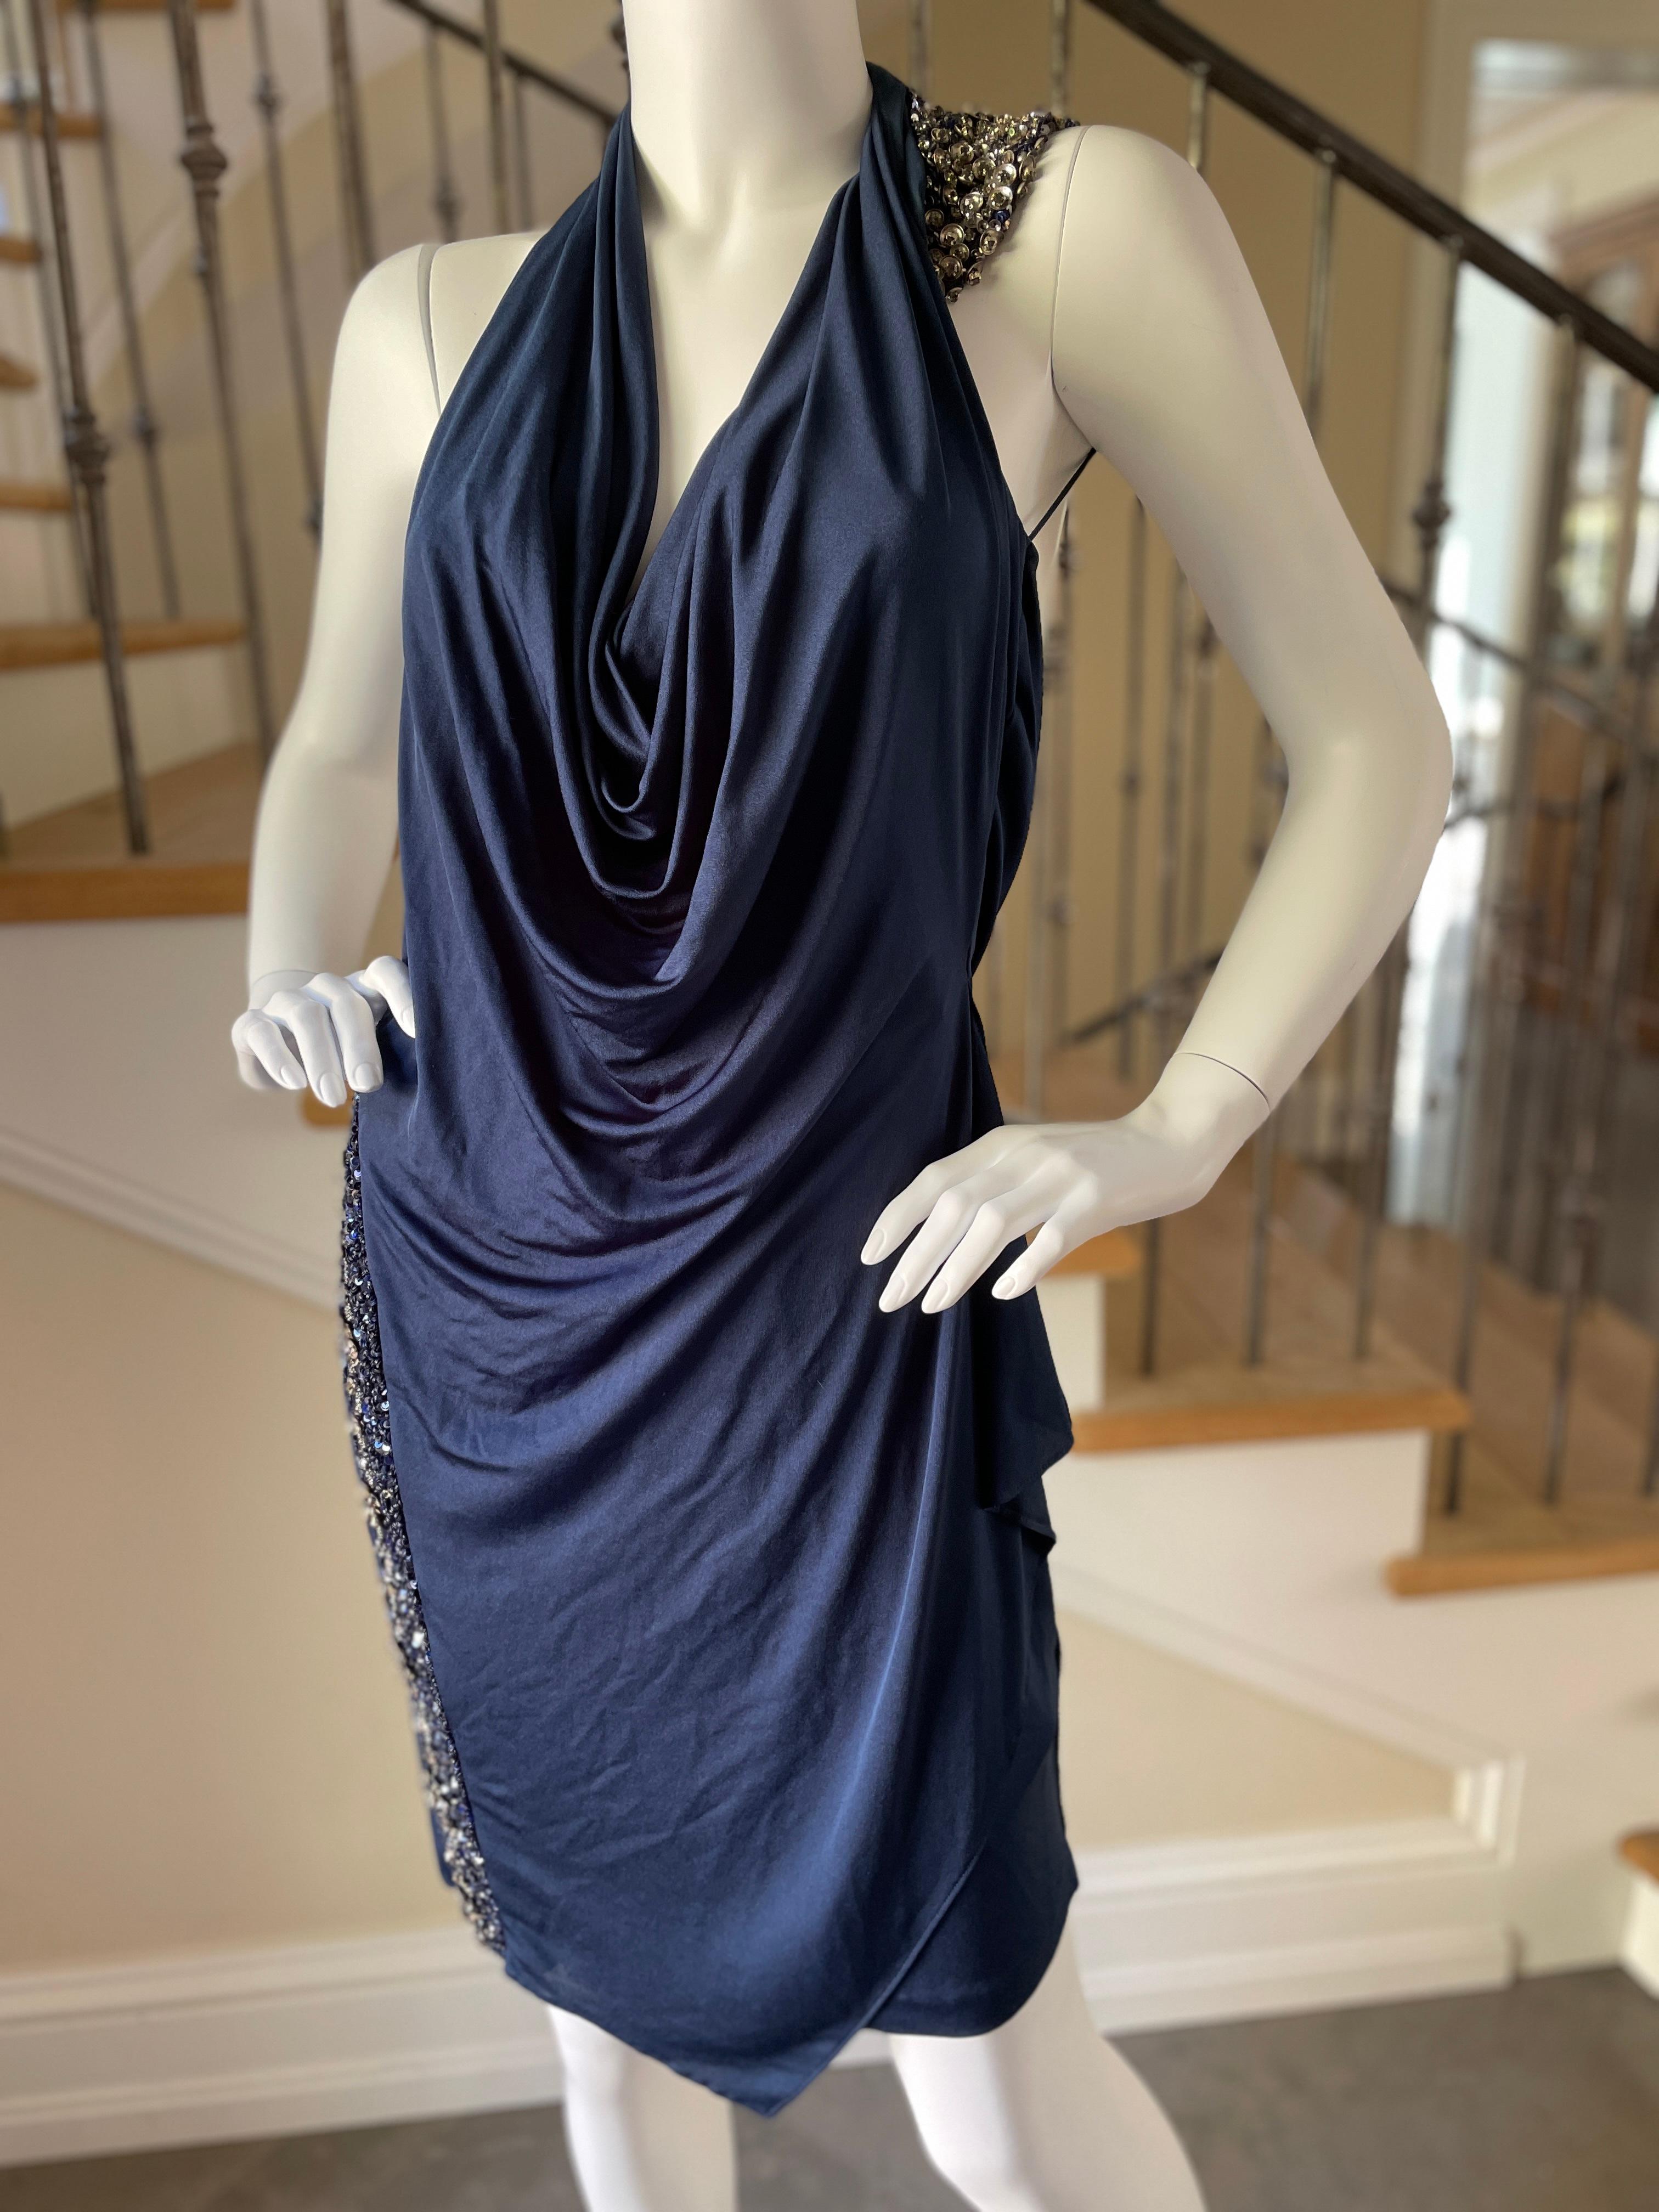 Roberto Cavalli Navy Blue Embellished Backless Mini Dress In Excellent Condition For Sale In Cloverdale, CA